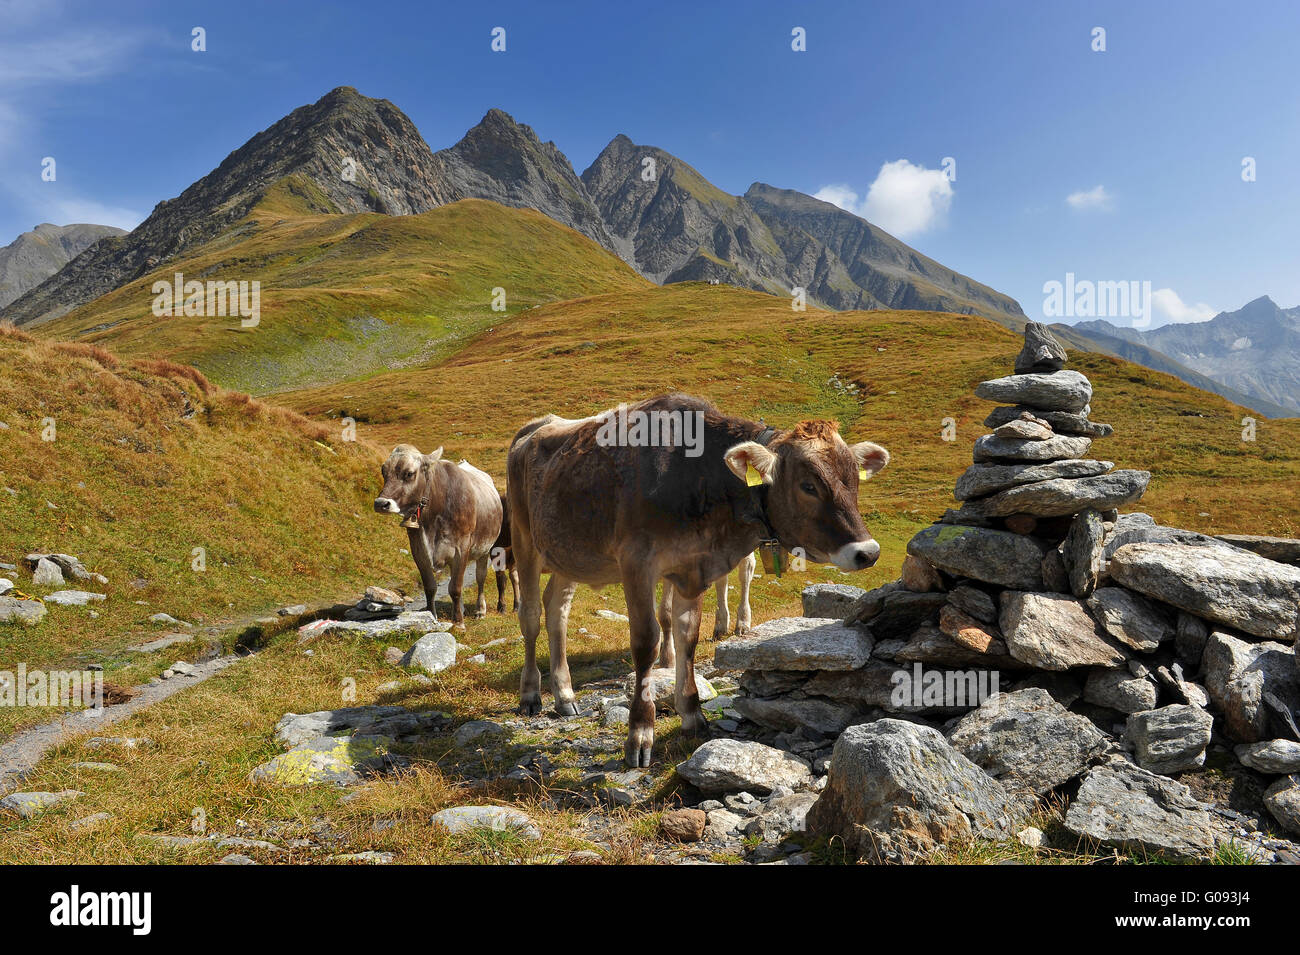 Cow at the feet of the mountains Stock Photo